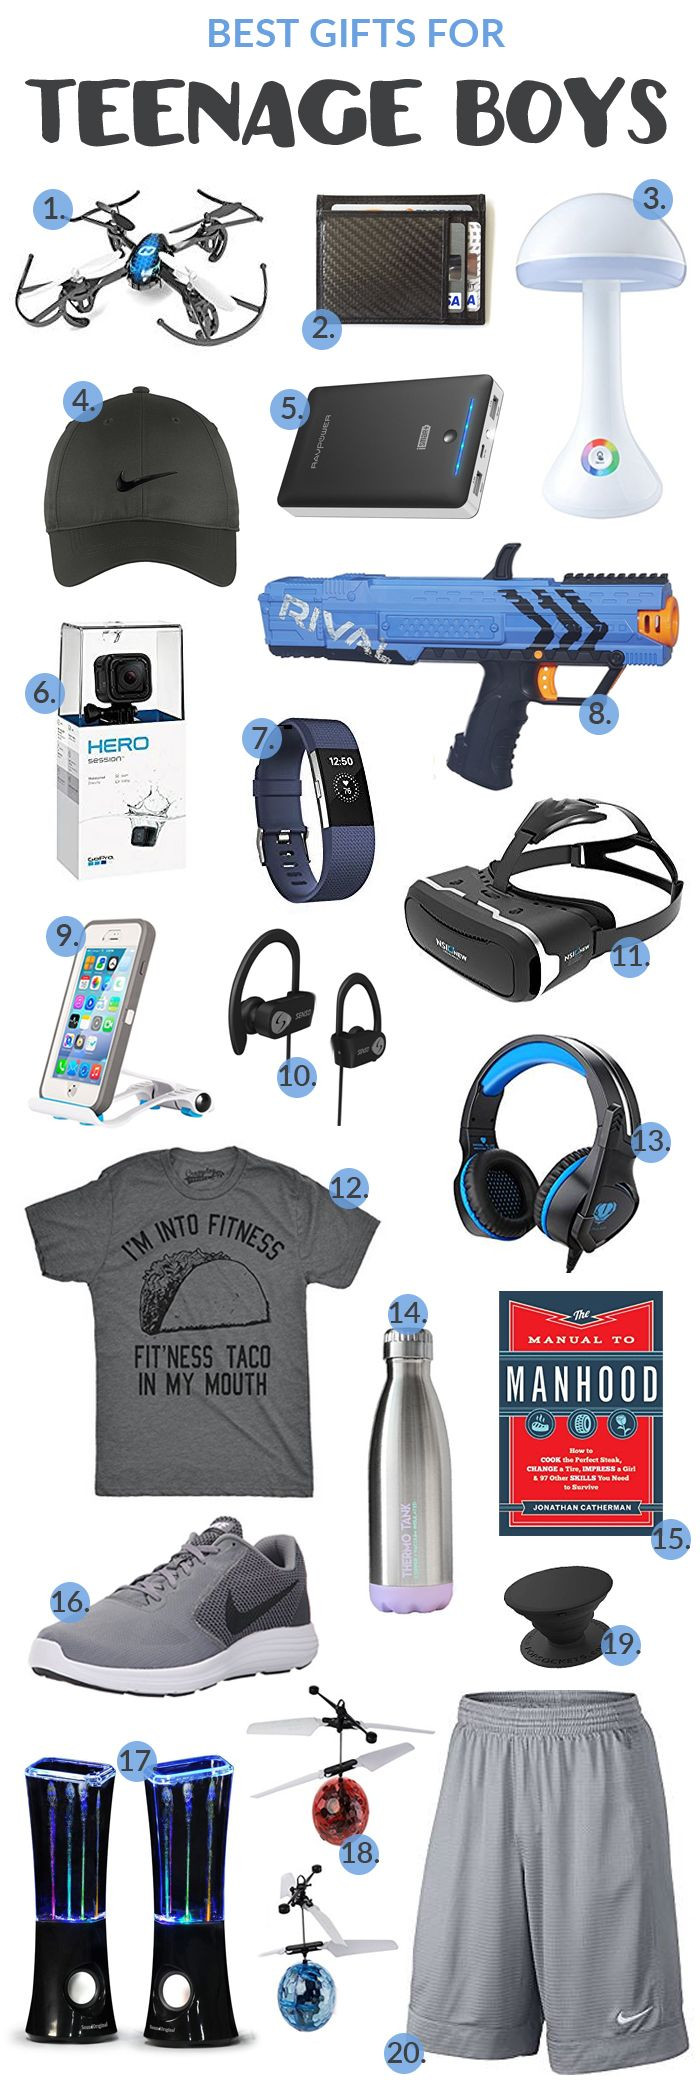 Birthday Gift Ideas For Teenage Guys
 Best Gifts for Teenage Boys